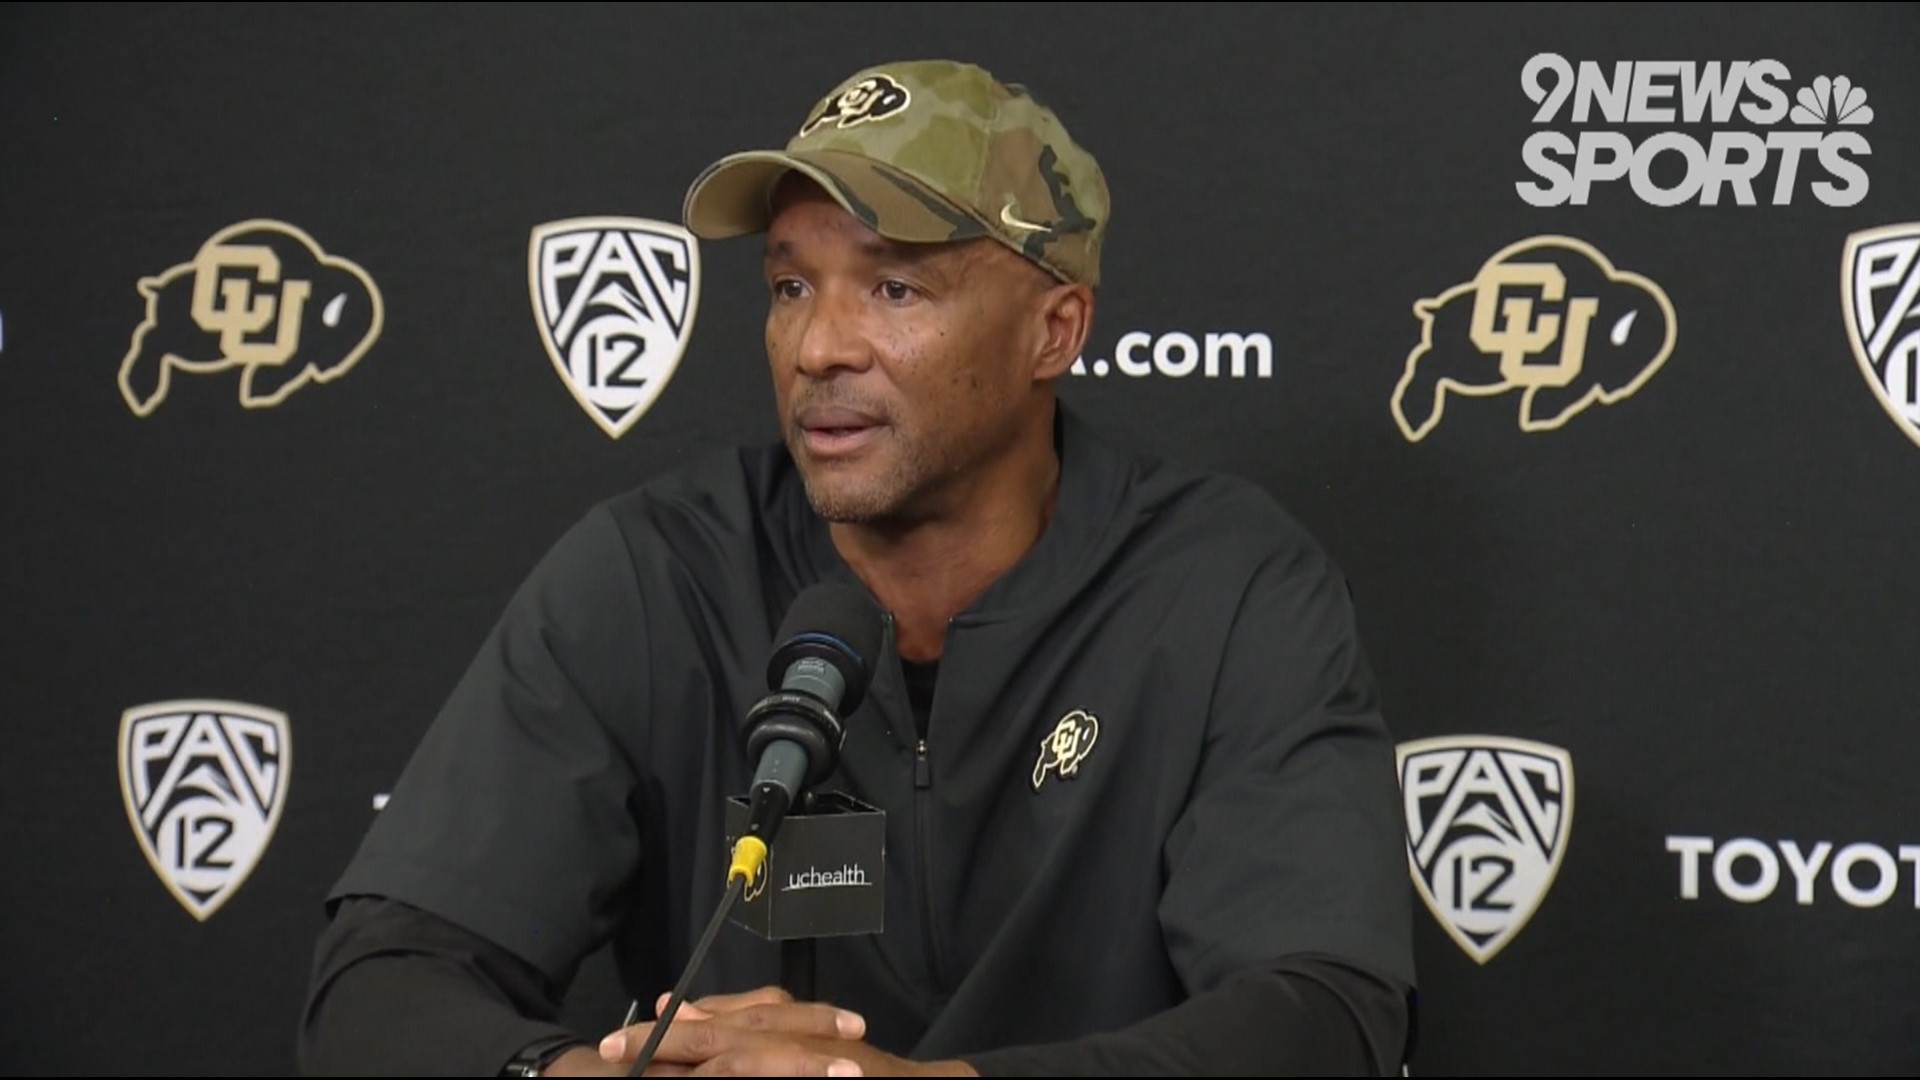 The Buffs look to bounce back from their loss to Texas A&M when they host Minnesota on Saturday at Folsom Field.